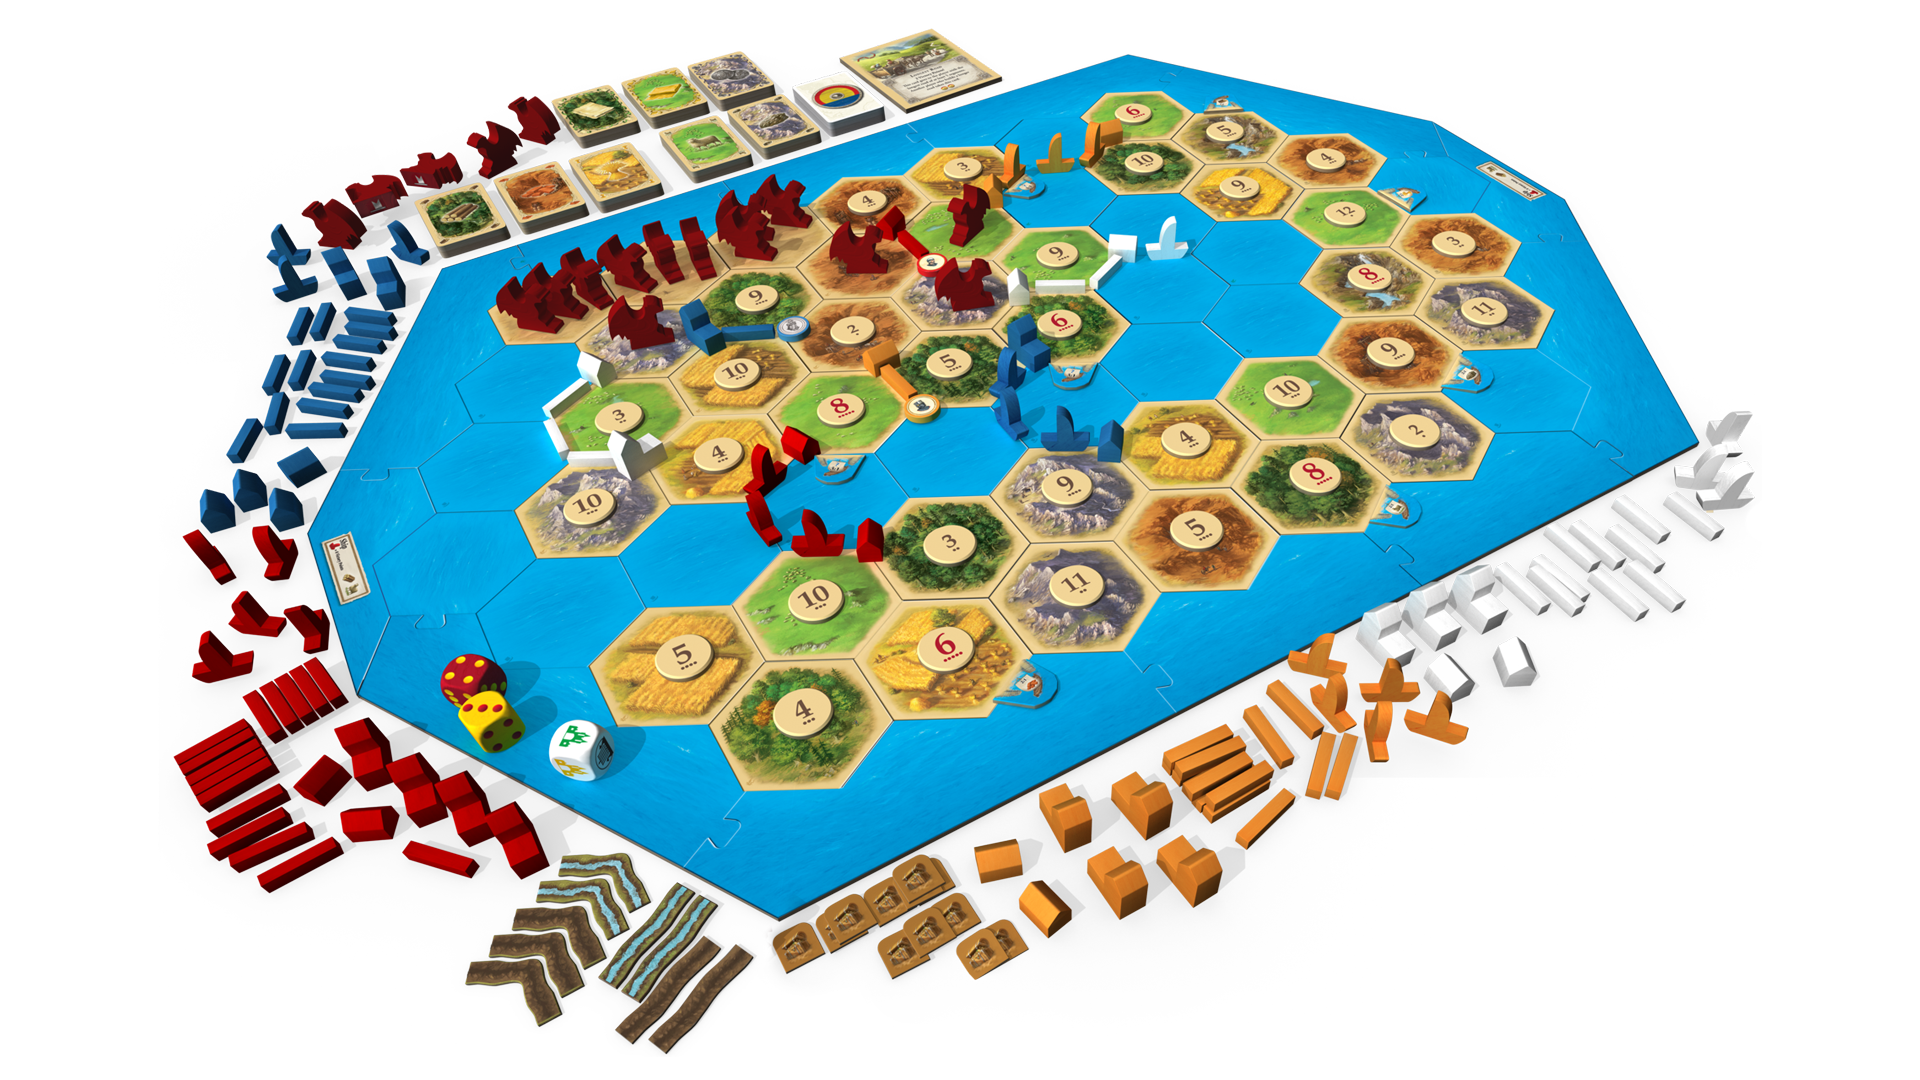 Catan: Dragons & Adventures expansion is arriving in English this summer | Dicebreaker